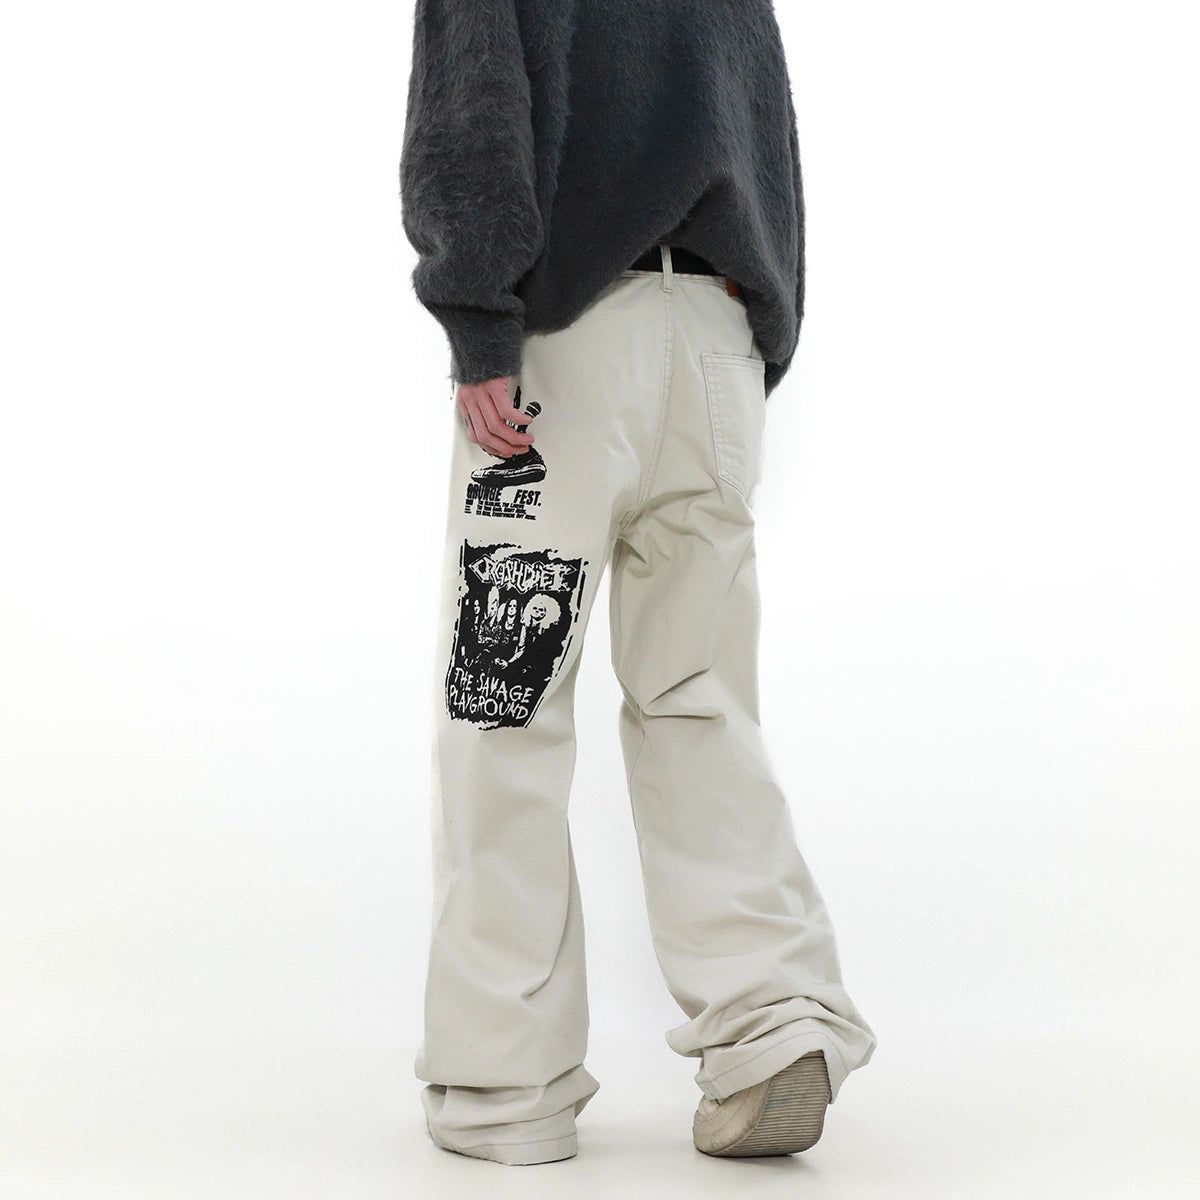 Alice Cooper Printed Jeans Korean Street Fashion Jeans By Mr Nearly Shop Online at OH Vault